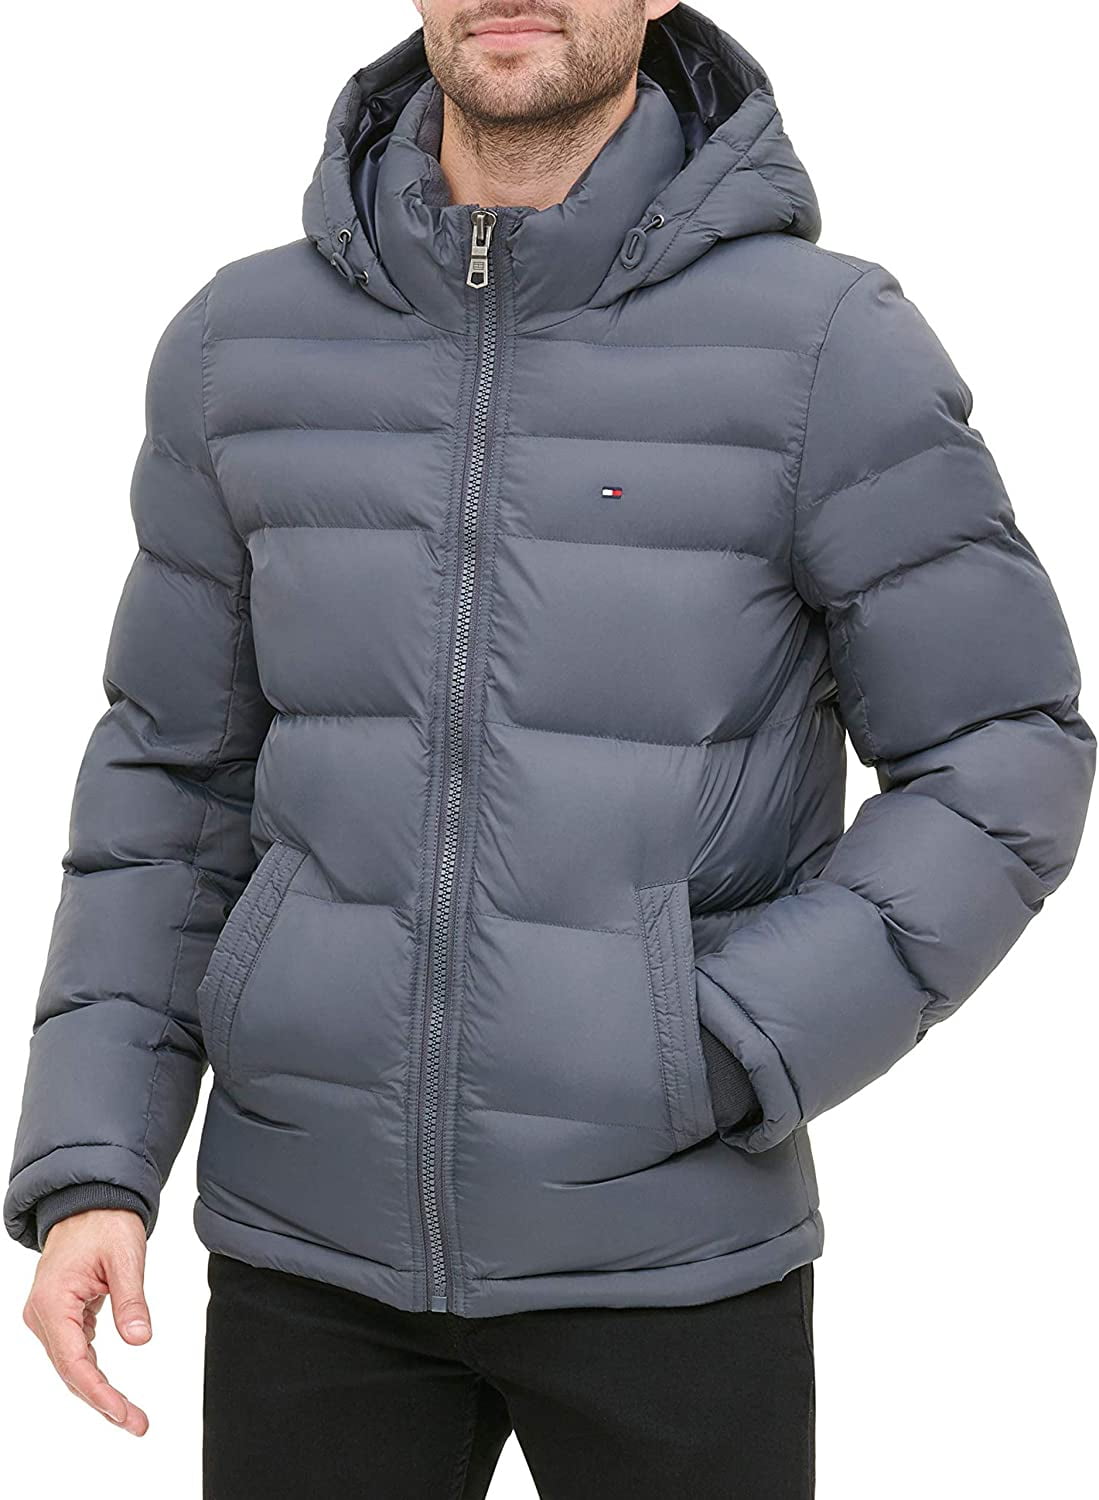 Clothing Standard and Big & Tall Tommy Hilfiger mens Hooded Puffer ...